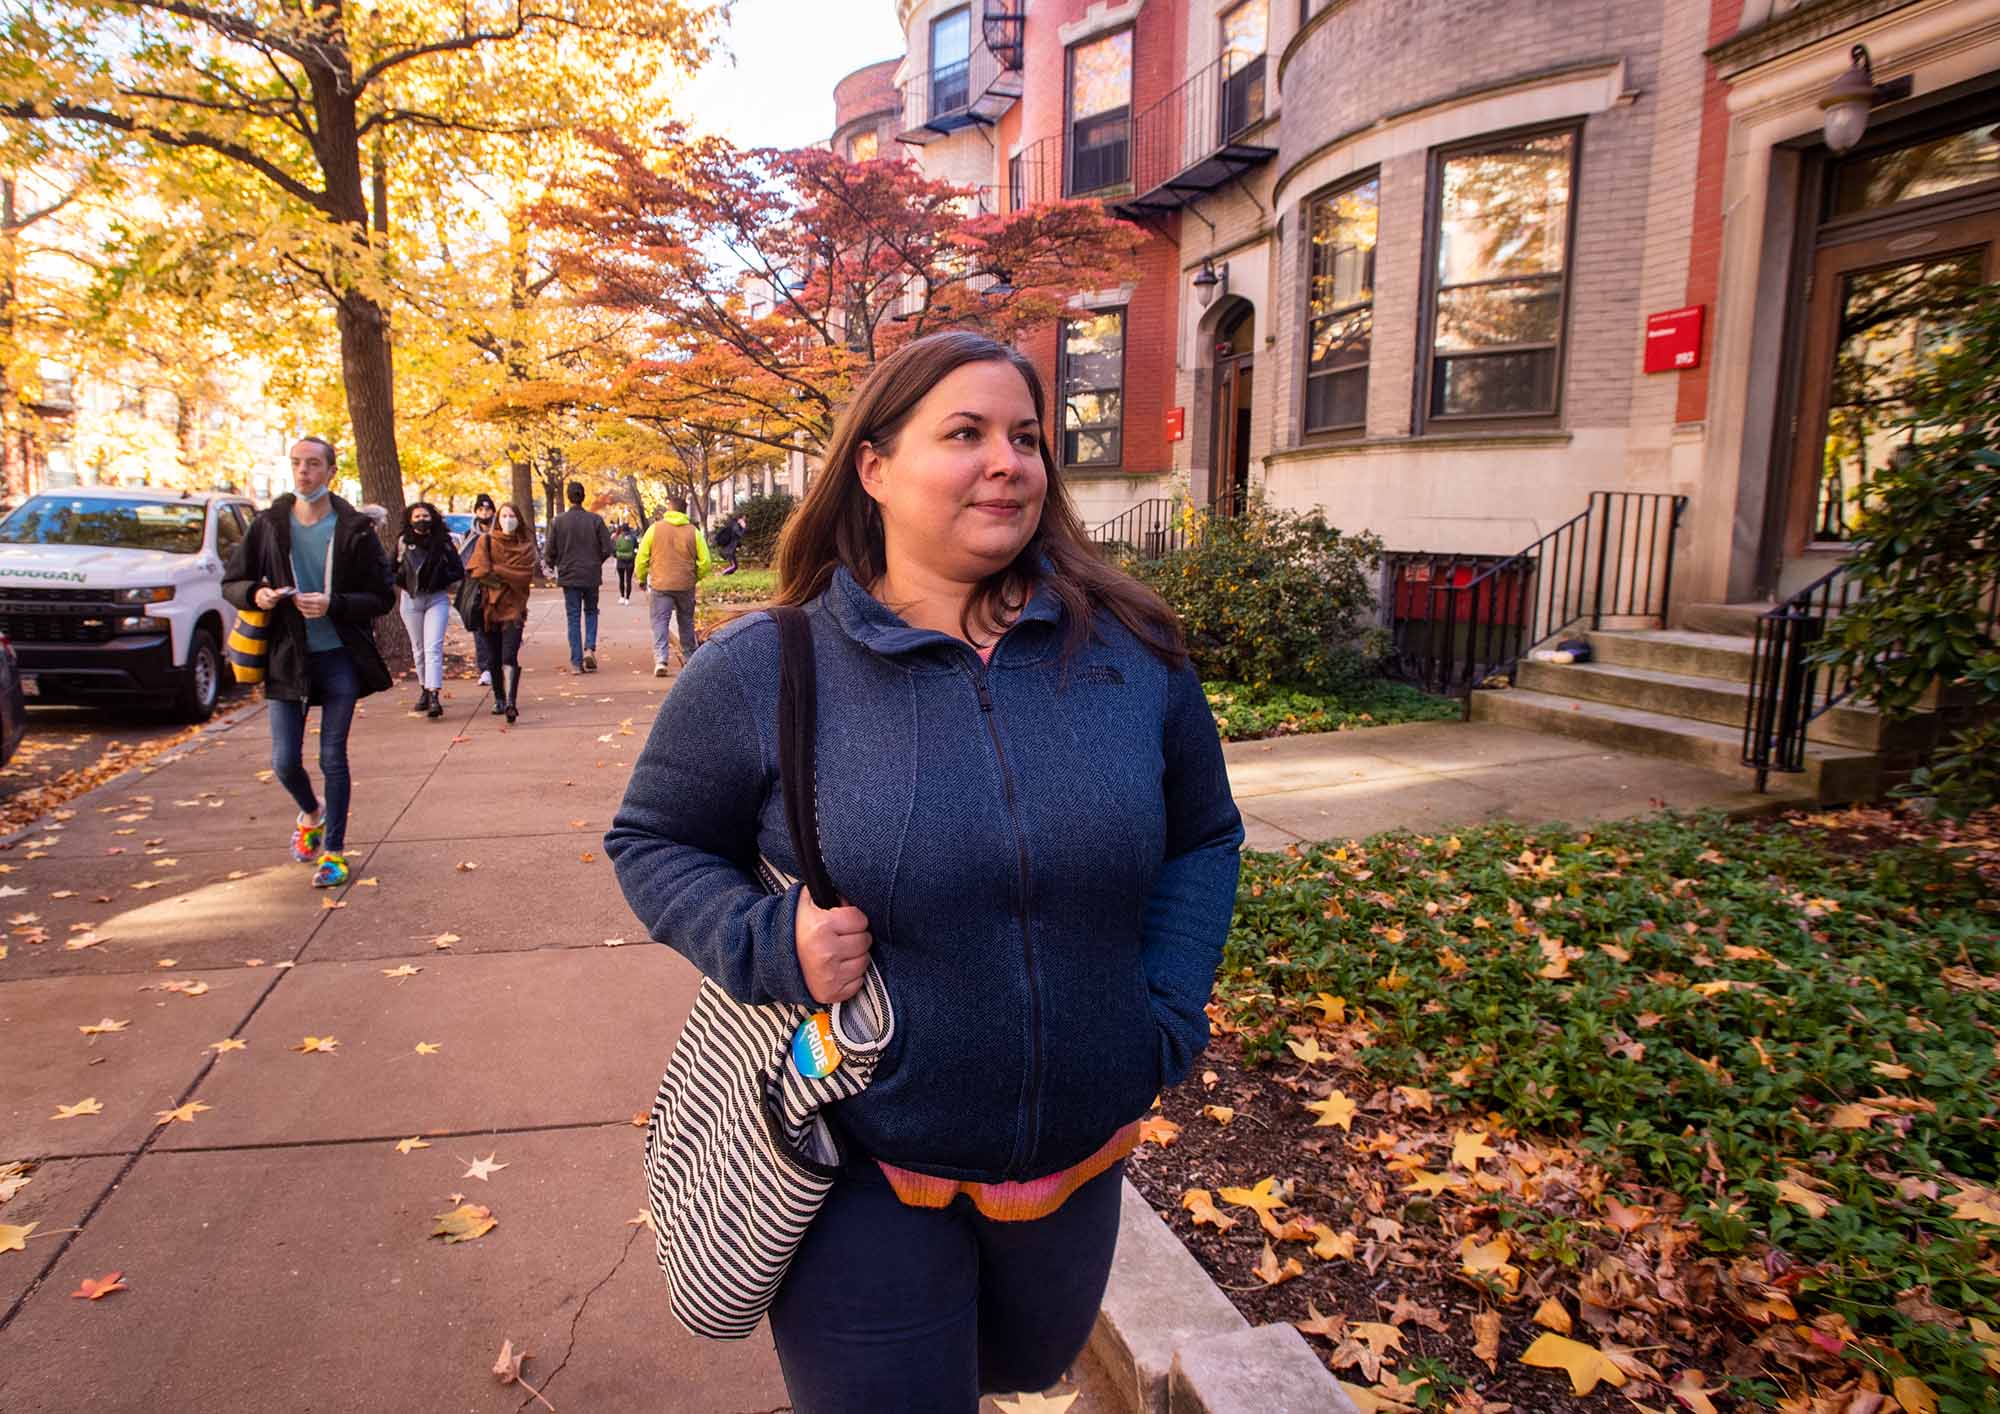 Photo of Rev. Kristen Hydinger, a white woman with brown hair and wearing a blue jacket, walking down a Boston street. Trees and leaves around her reflect Autumn in their color (yellow)